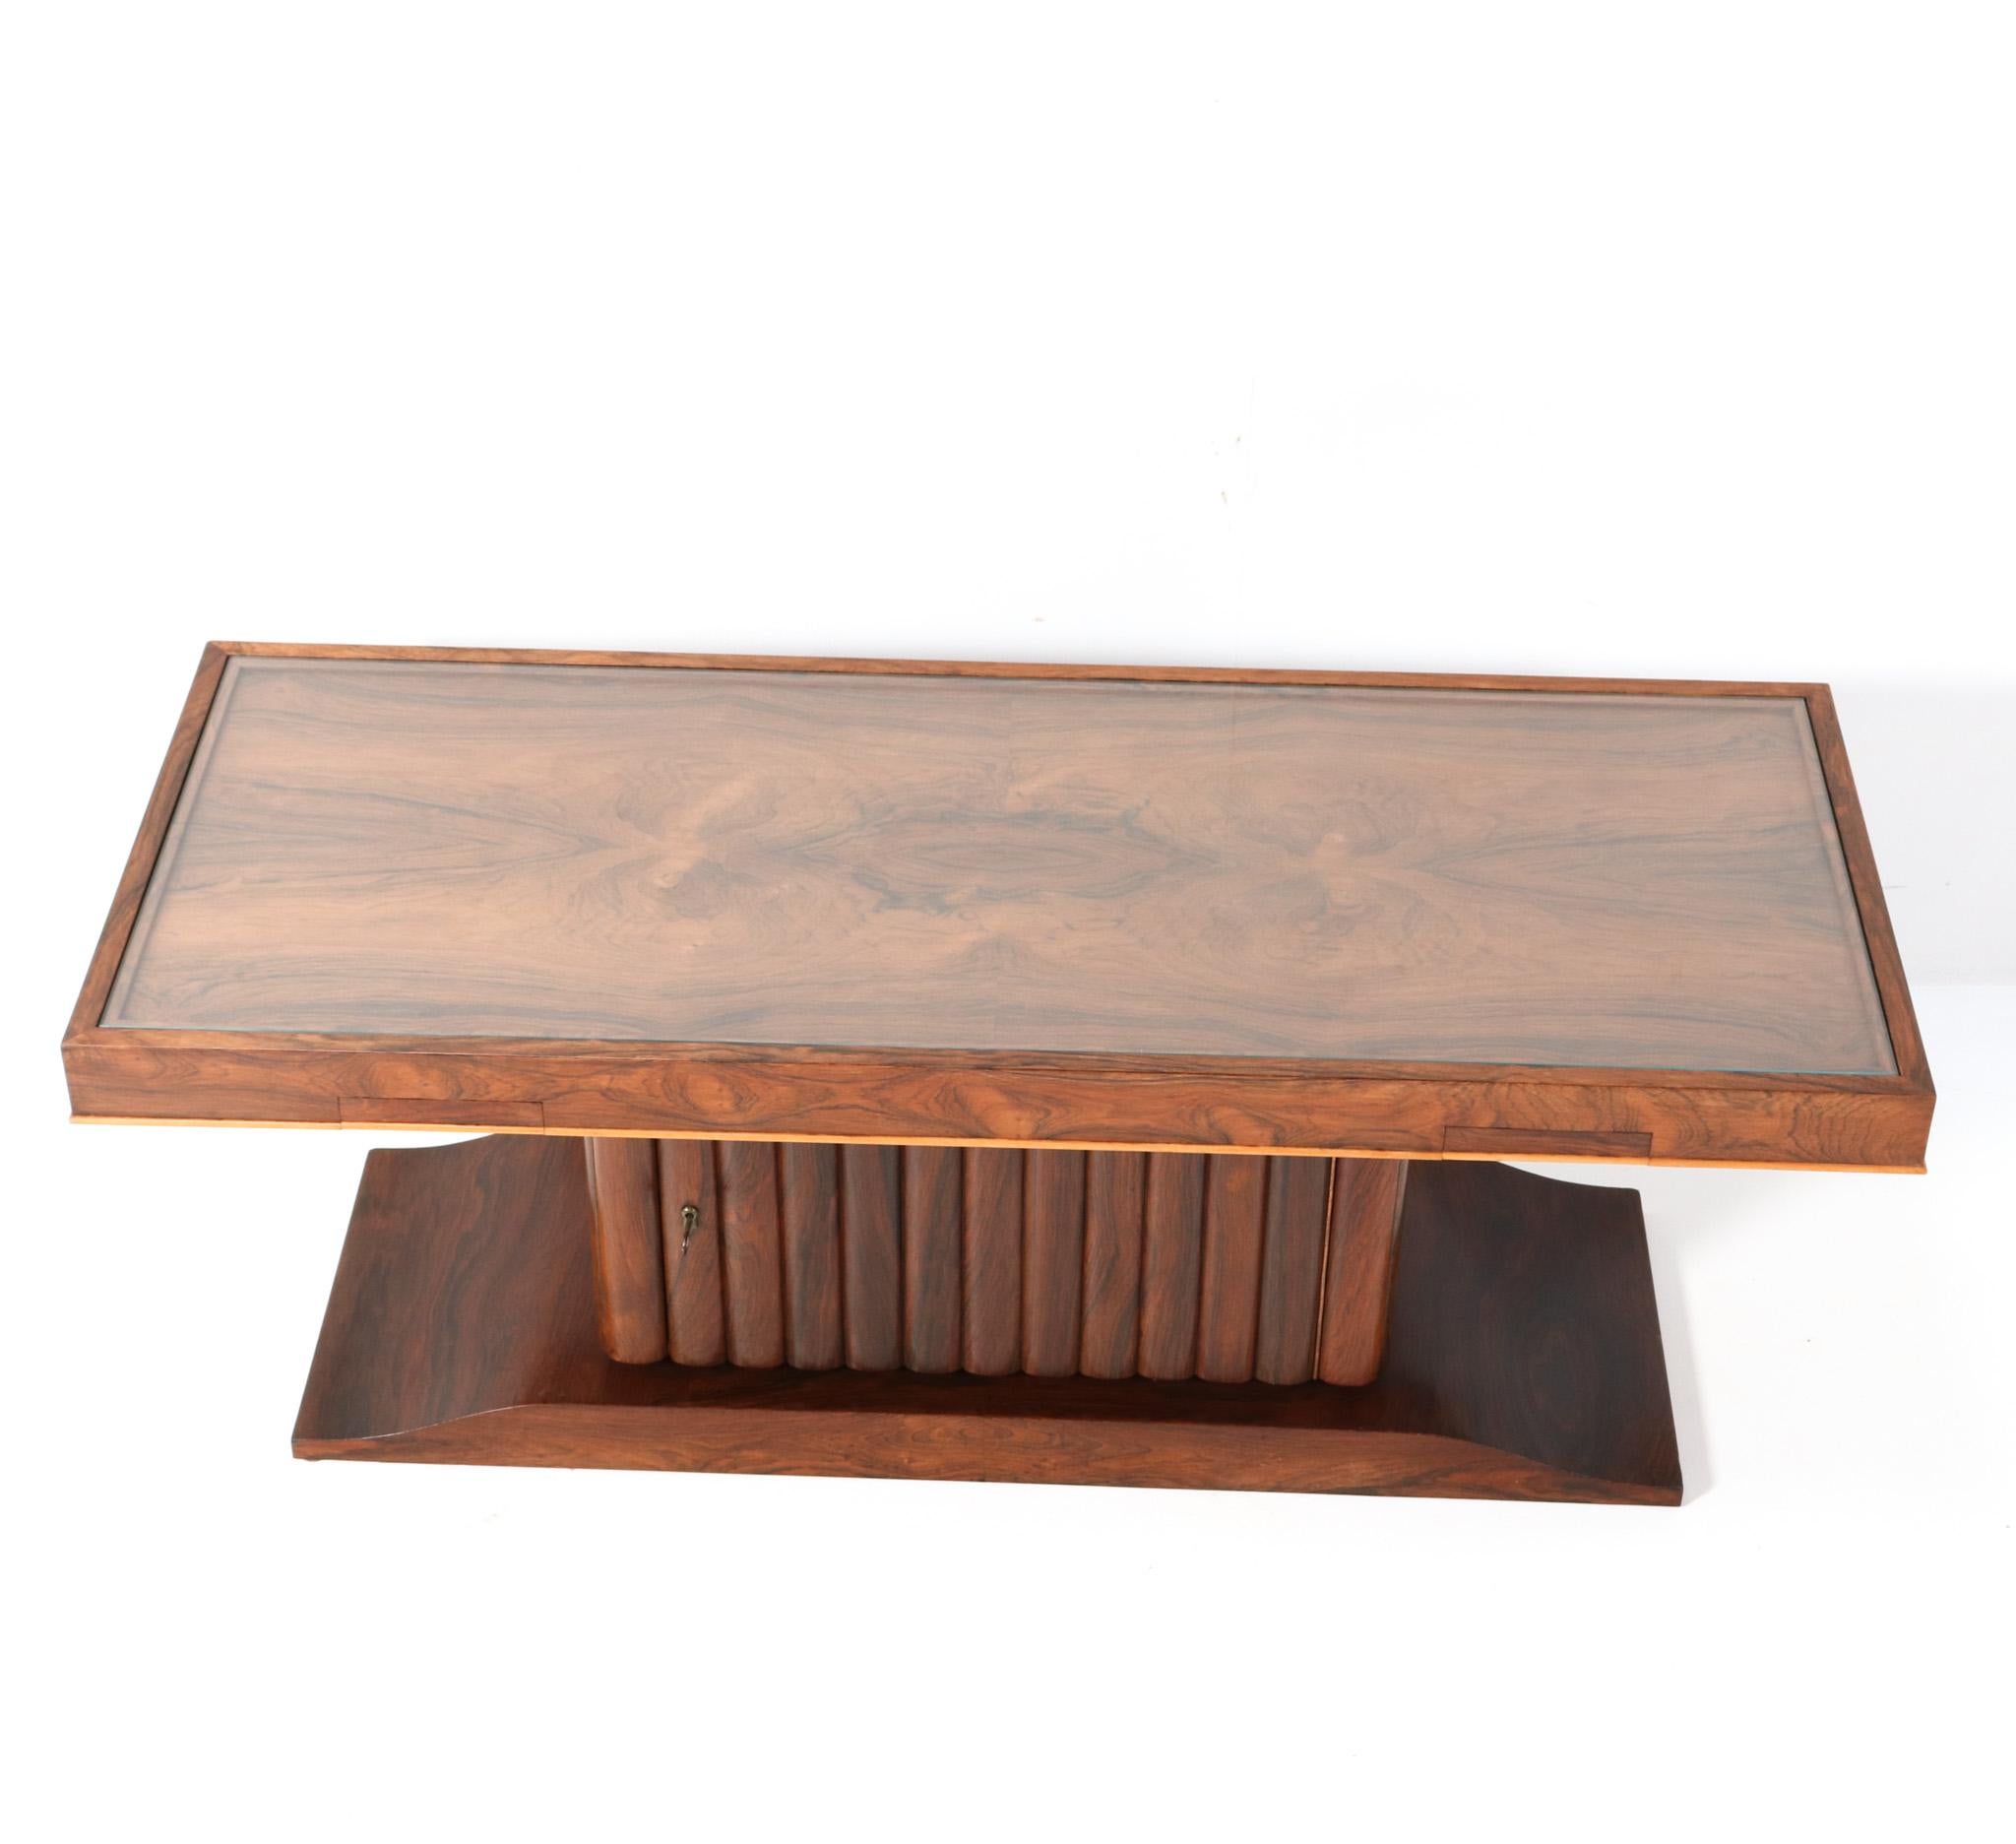 Magnificent and ultra rare Art Deco coffee table or cocktail table.
Design by Gebroeders Reens Amsterdam.
Striking Dutch design from the 1930s.
Solid padouk and padouk veneer base with original padouk veneered top.
Integrated dry-bar with glass